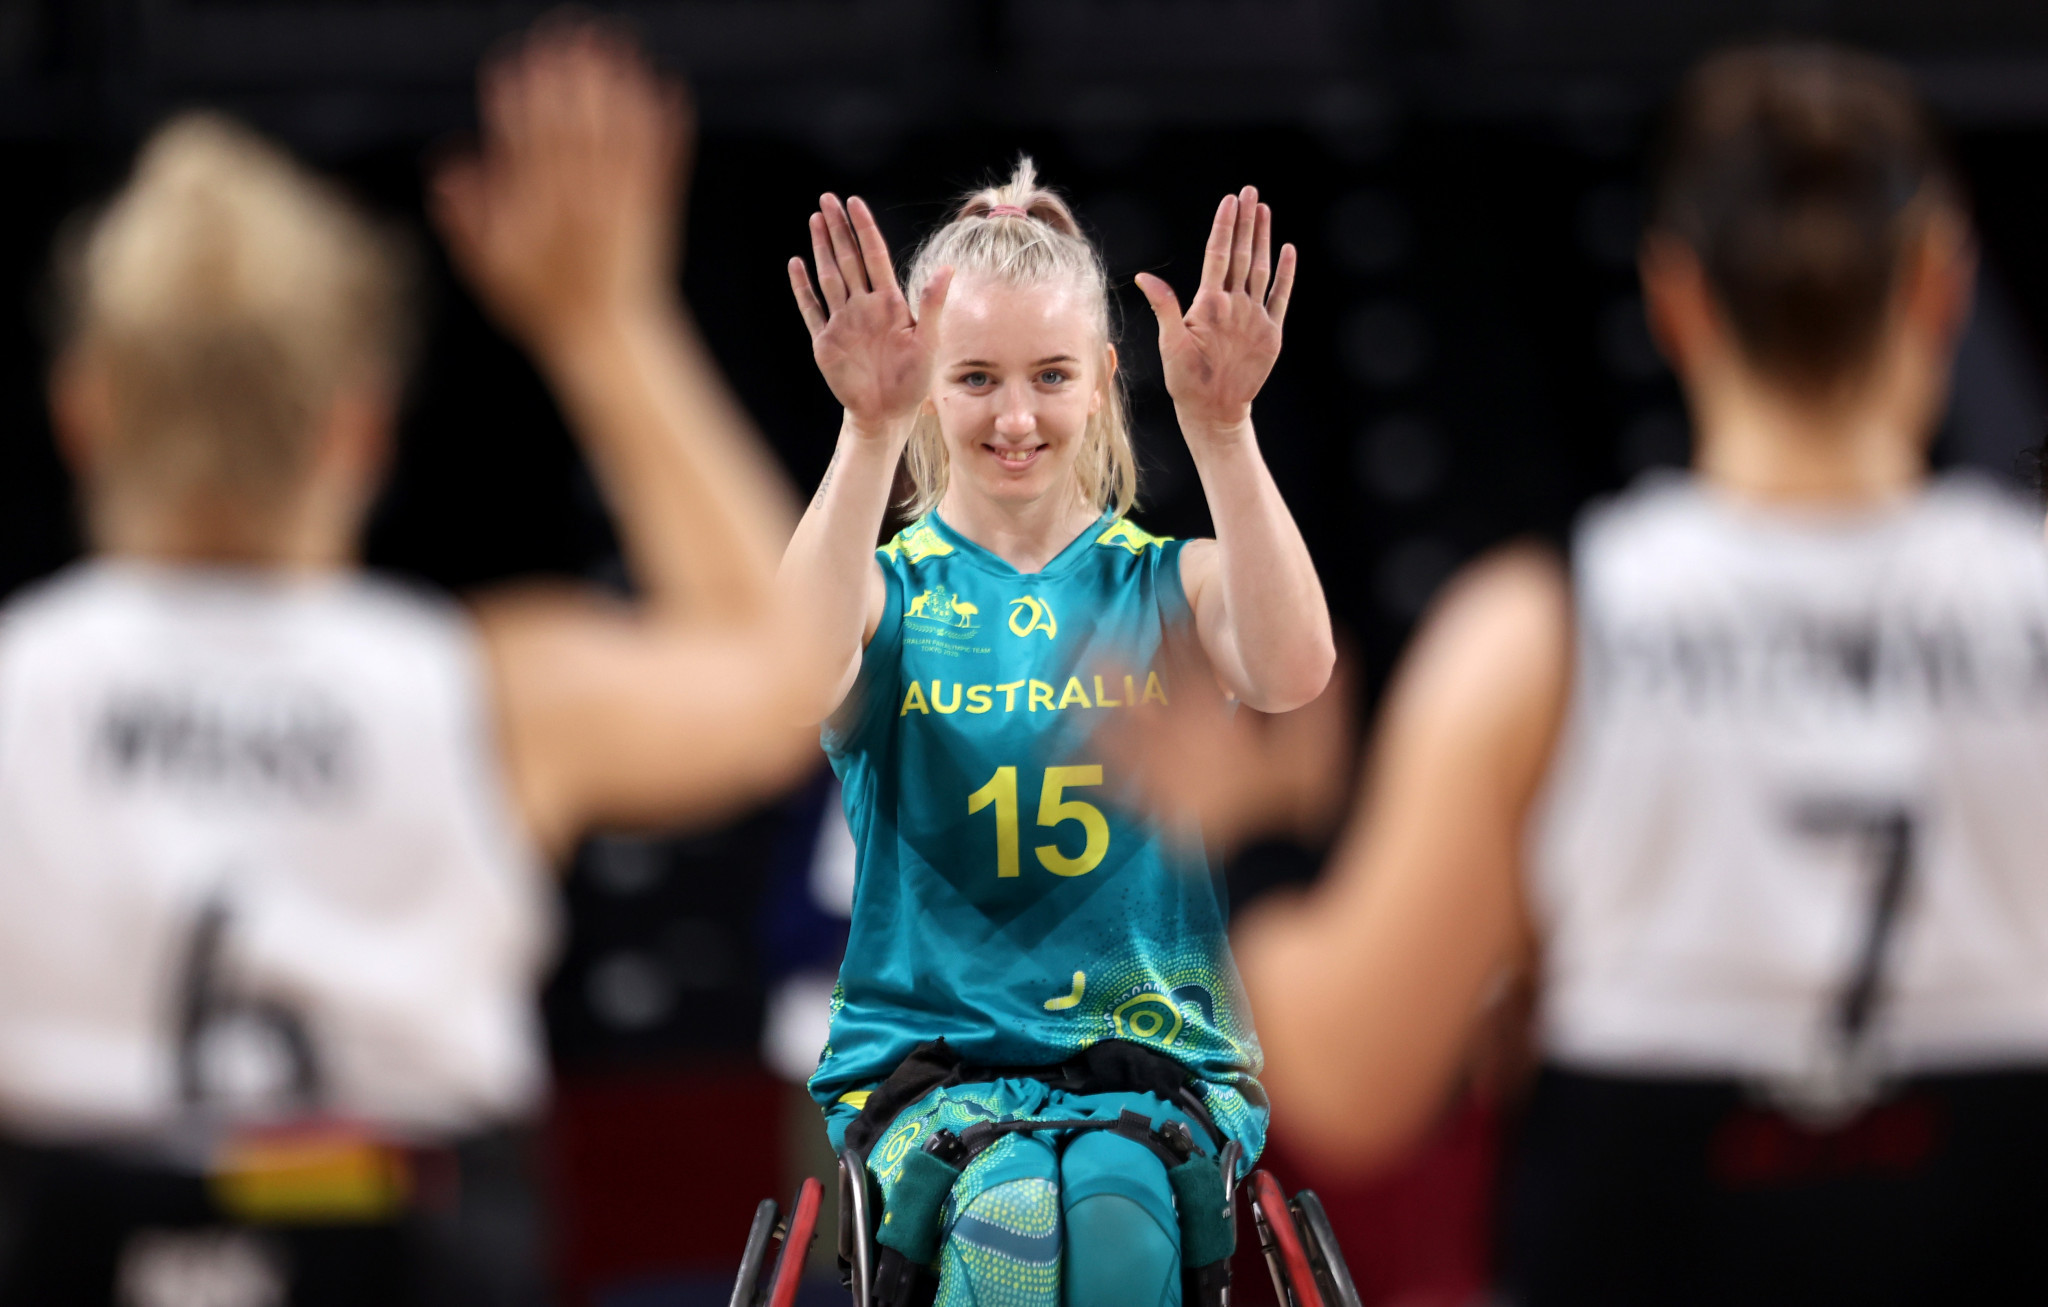 Australia's Amber Merritt contributed 40 points in the final and was named the women's most valuable player at the IWBF Asia Oceania Championships ©Getty Images